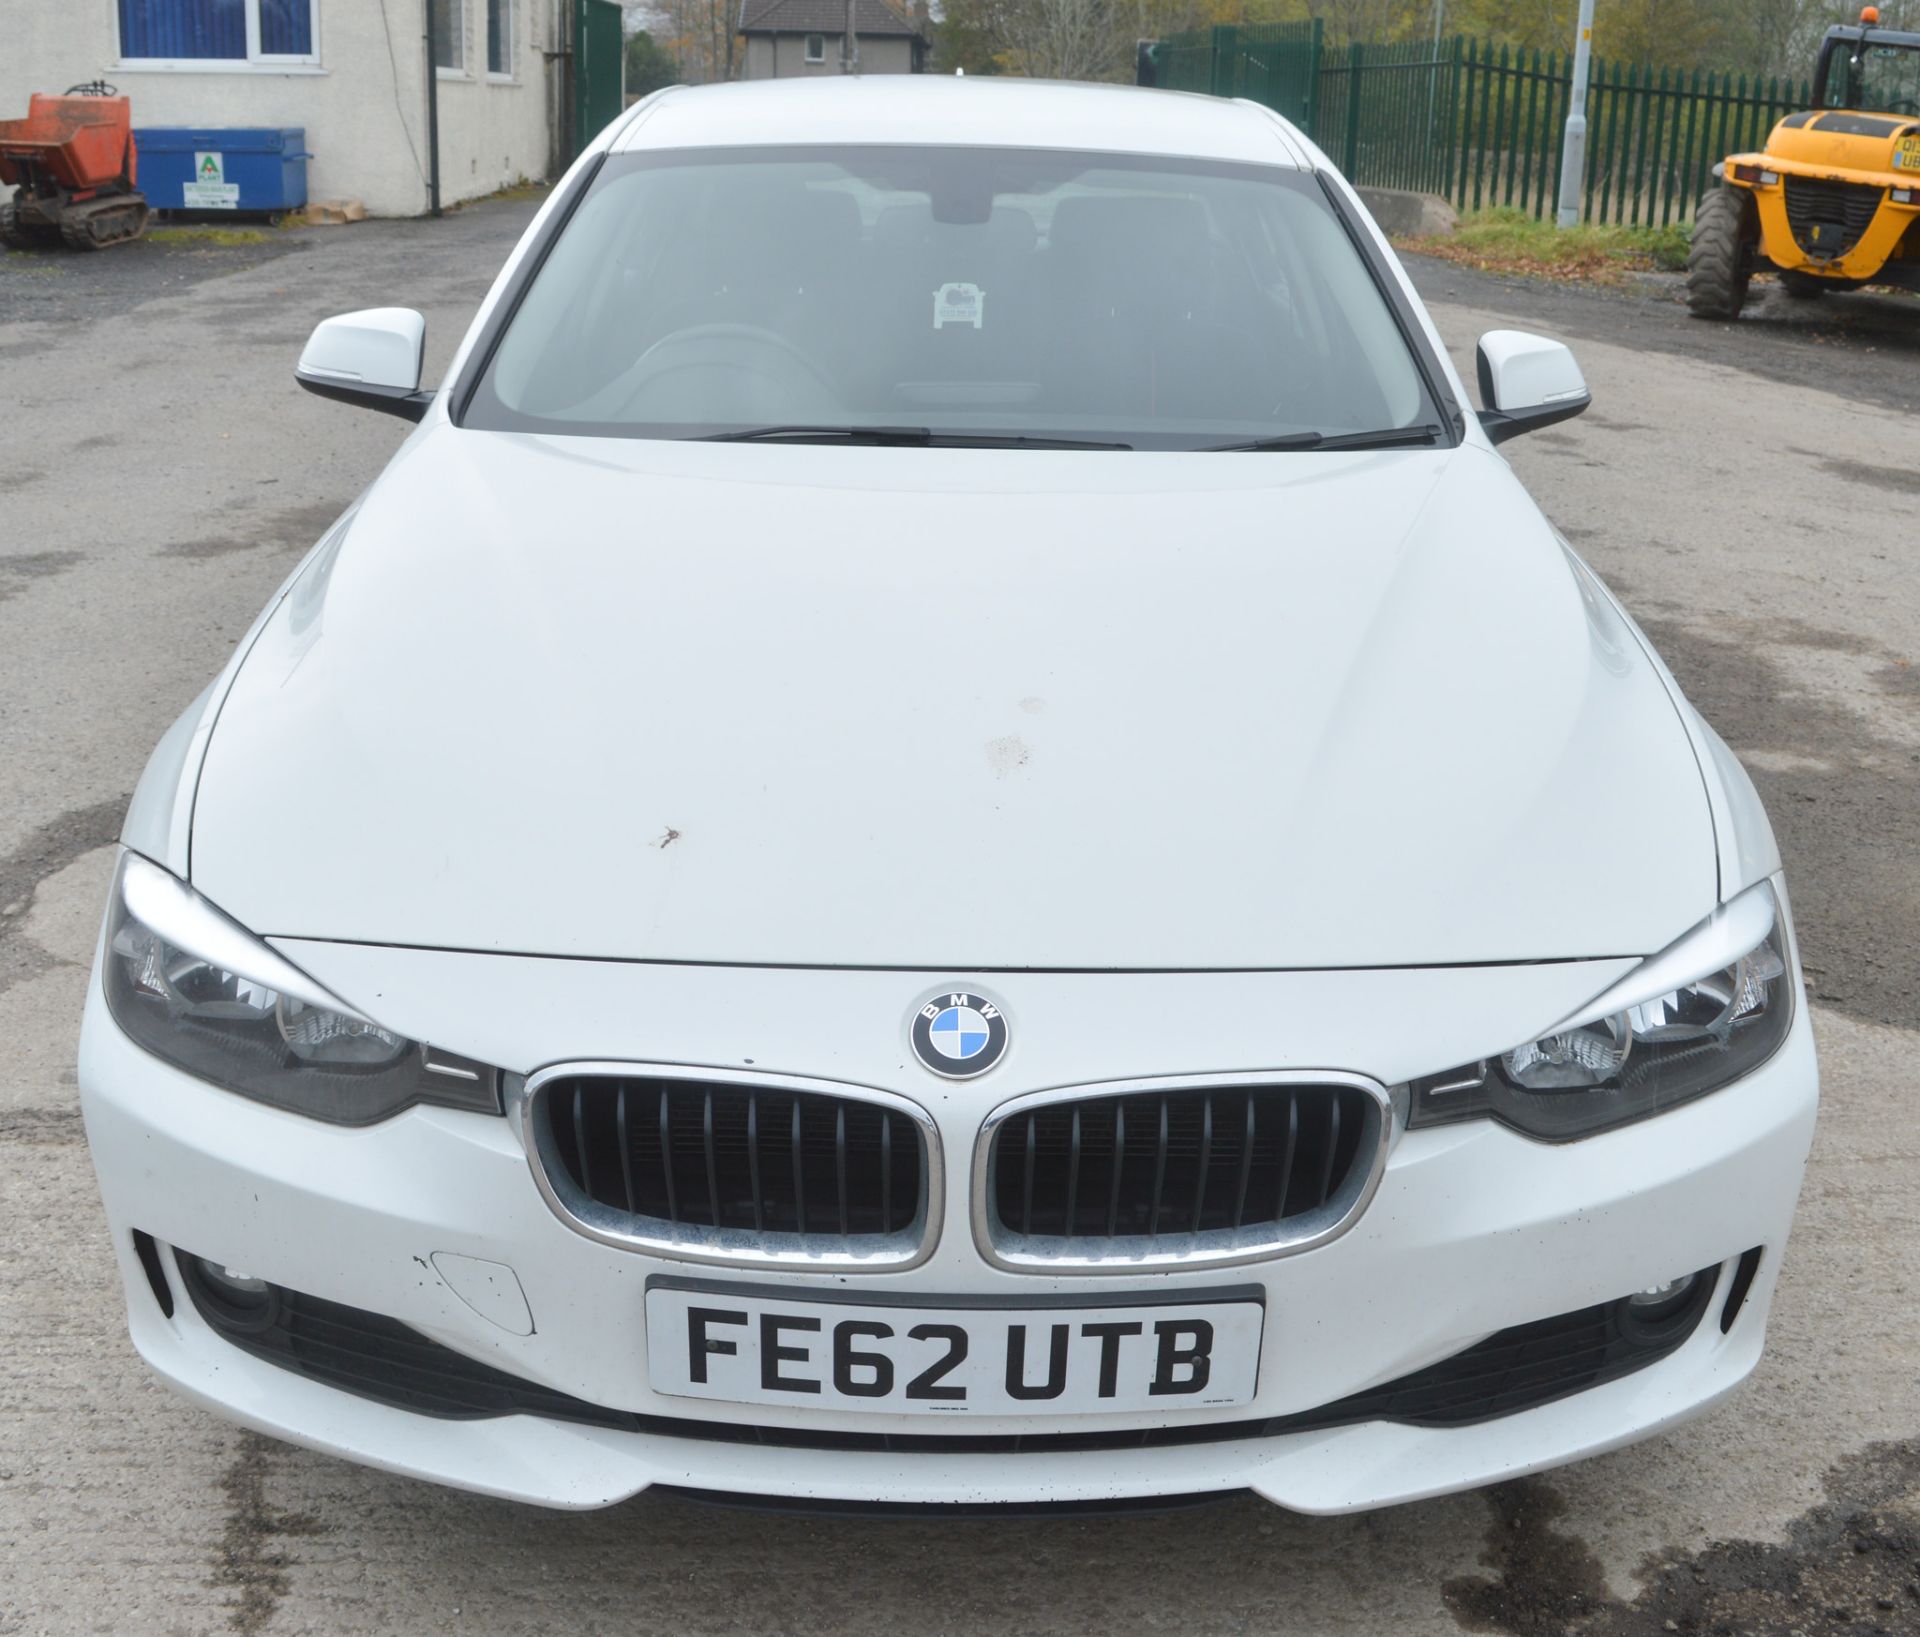 BMW 3 Series 2.0 320d Sport 4dr automatic saloon car  Registration Number: FE62 UTB Date of - Image 3 of 18